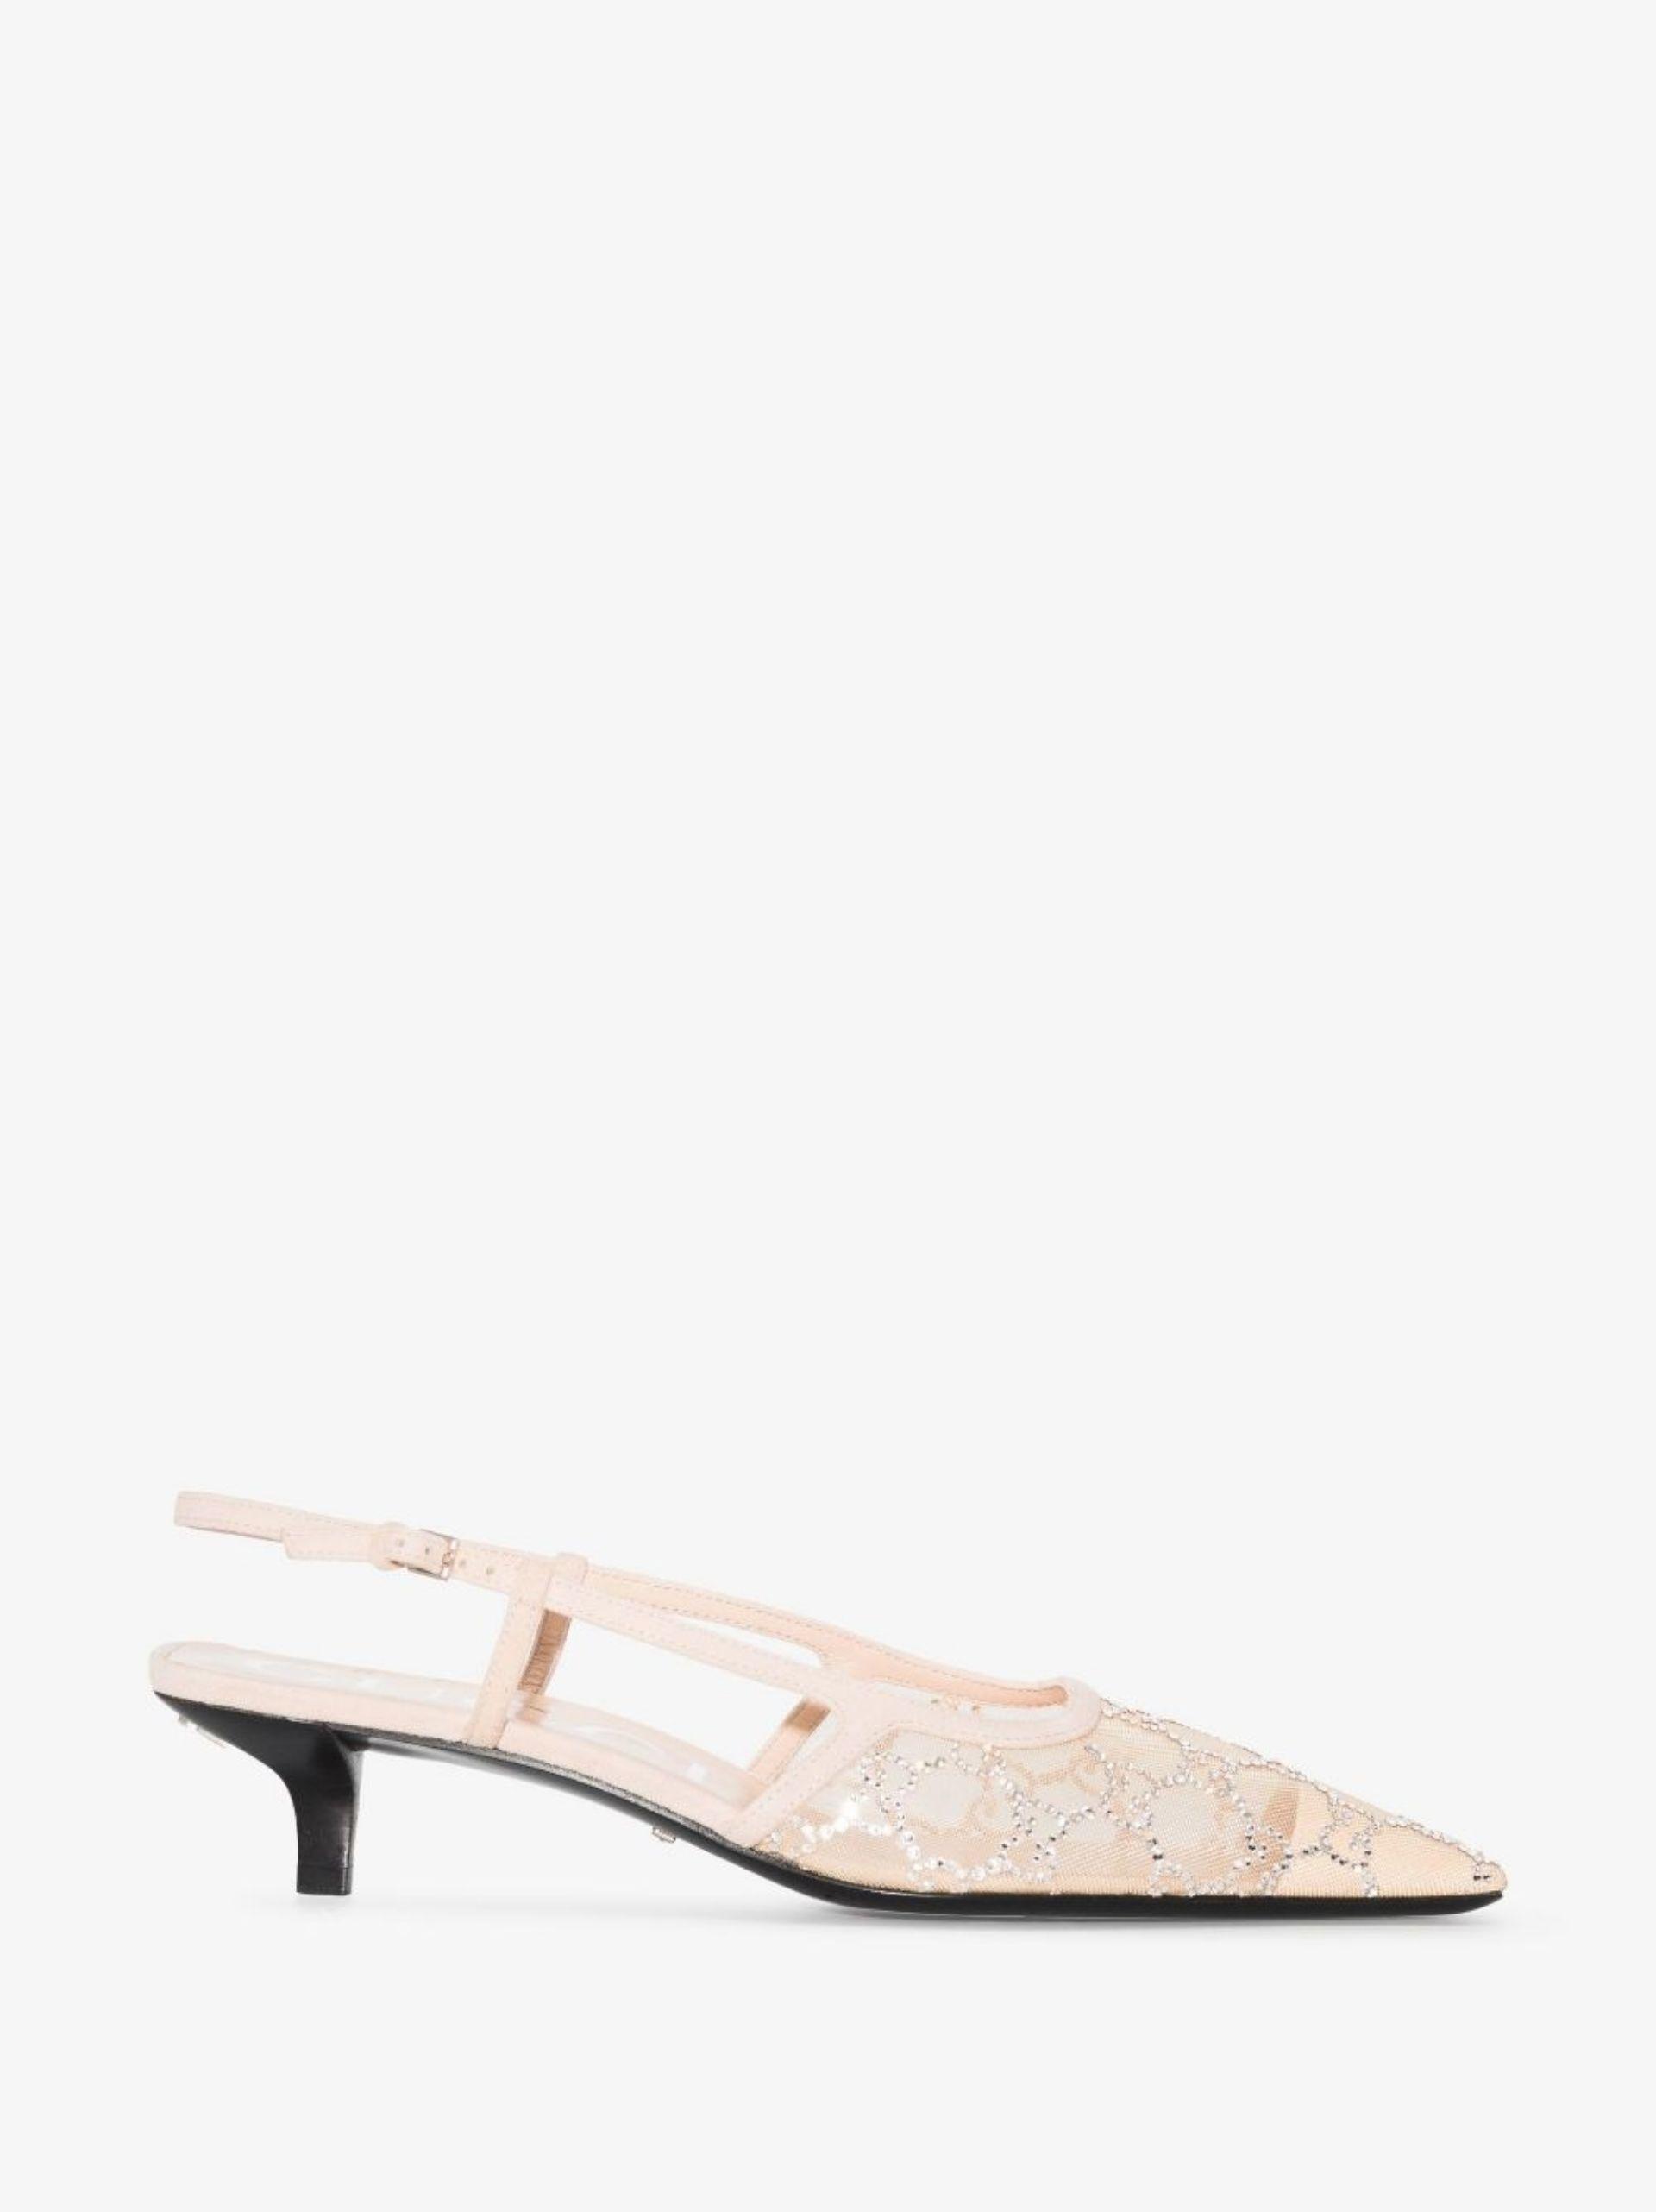 Gucci Neutral gg 35 Crystal Embellished Slingback Pumps in White | Lyst